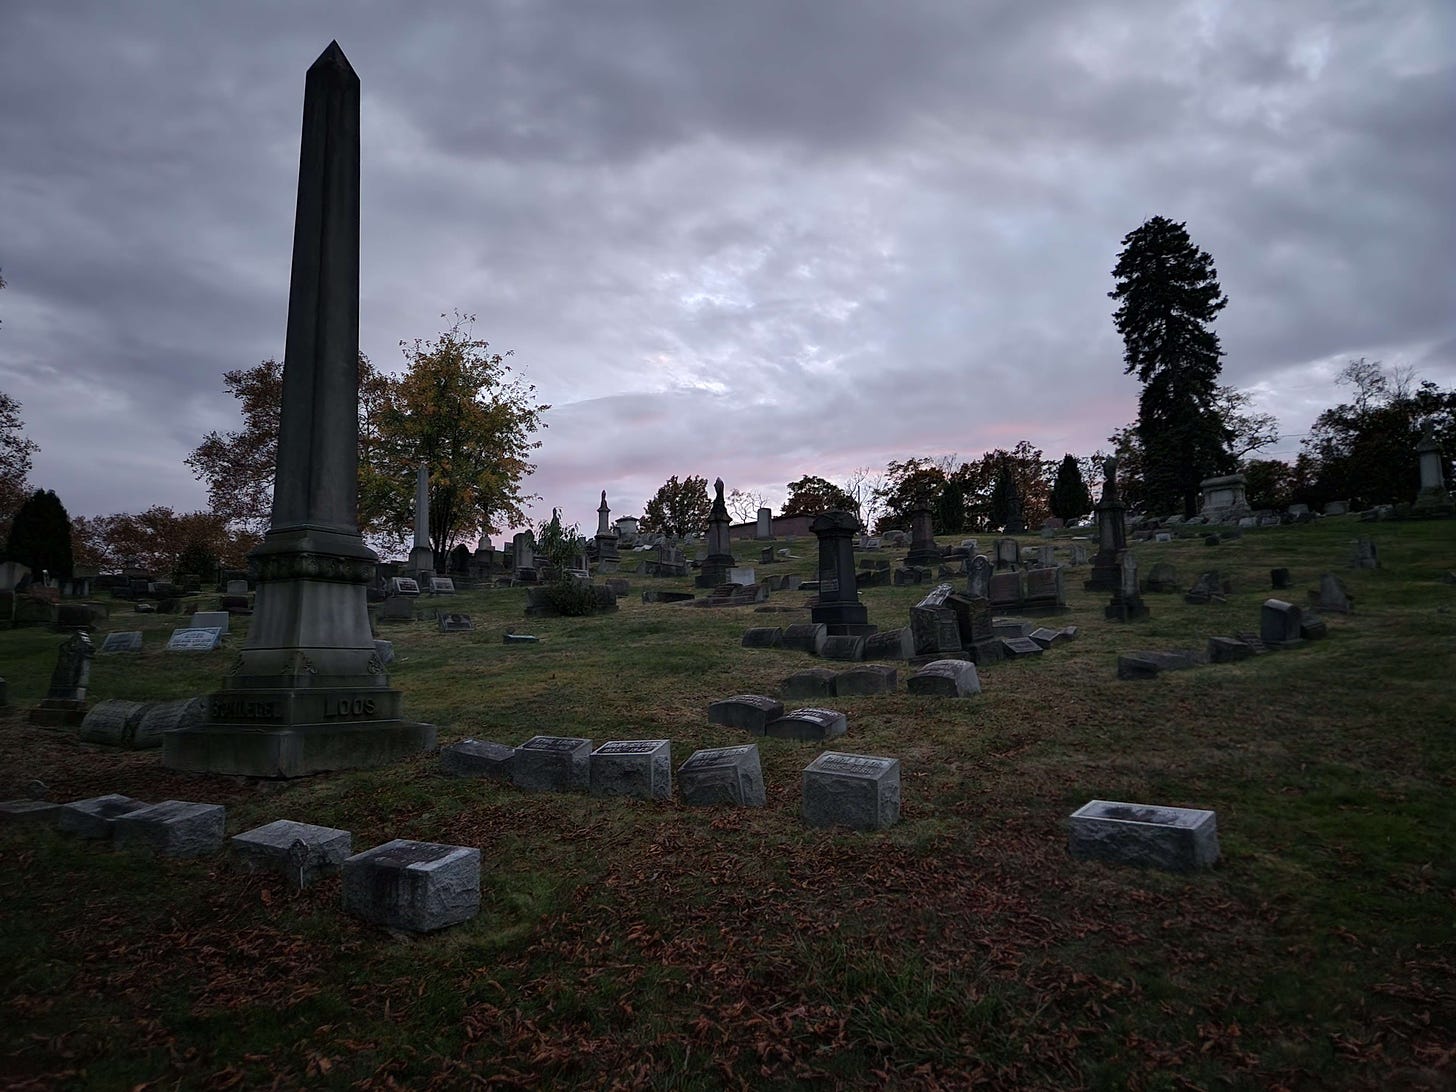 image: a cemetery on a cloudy Autumn day